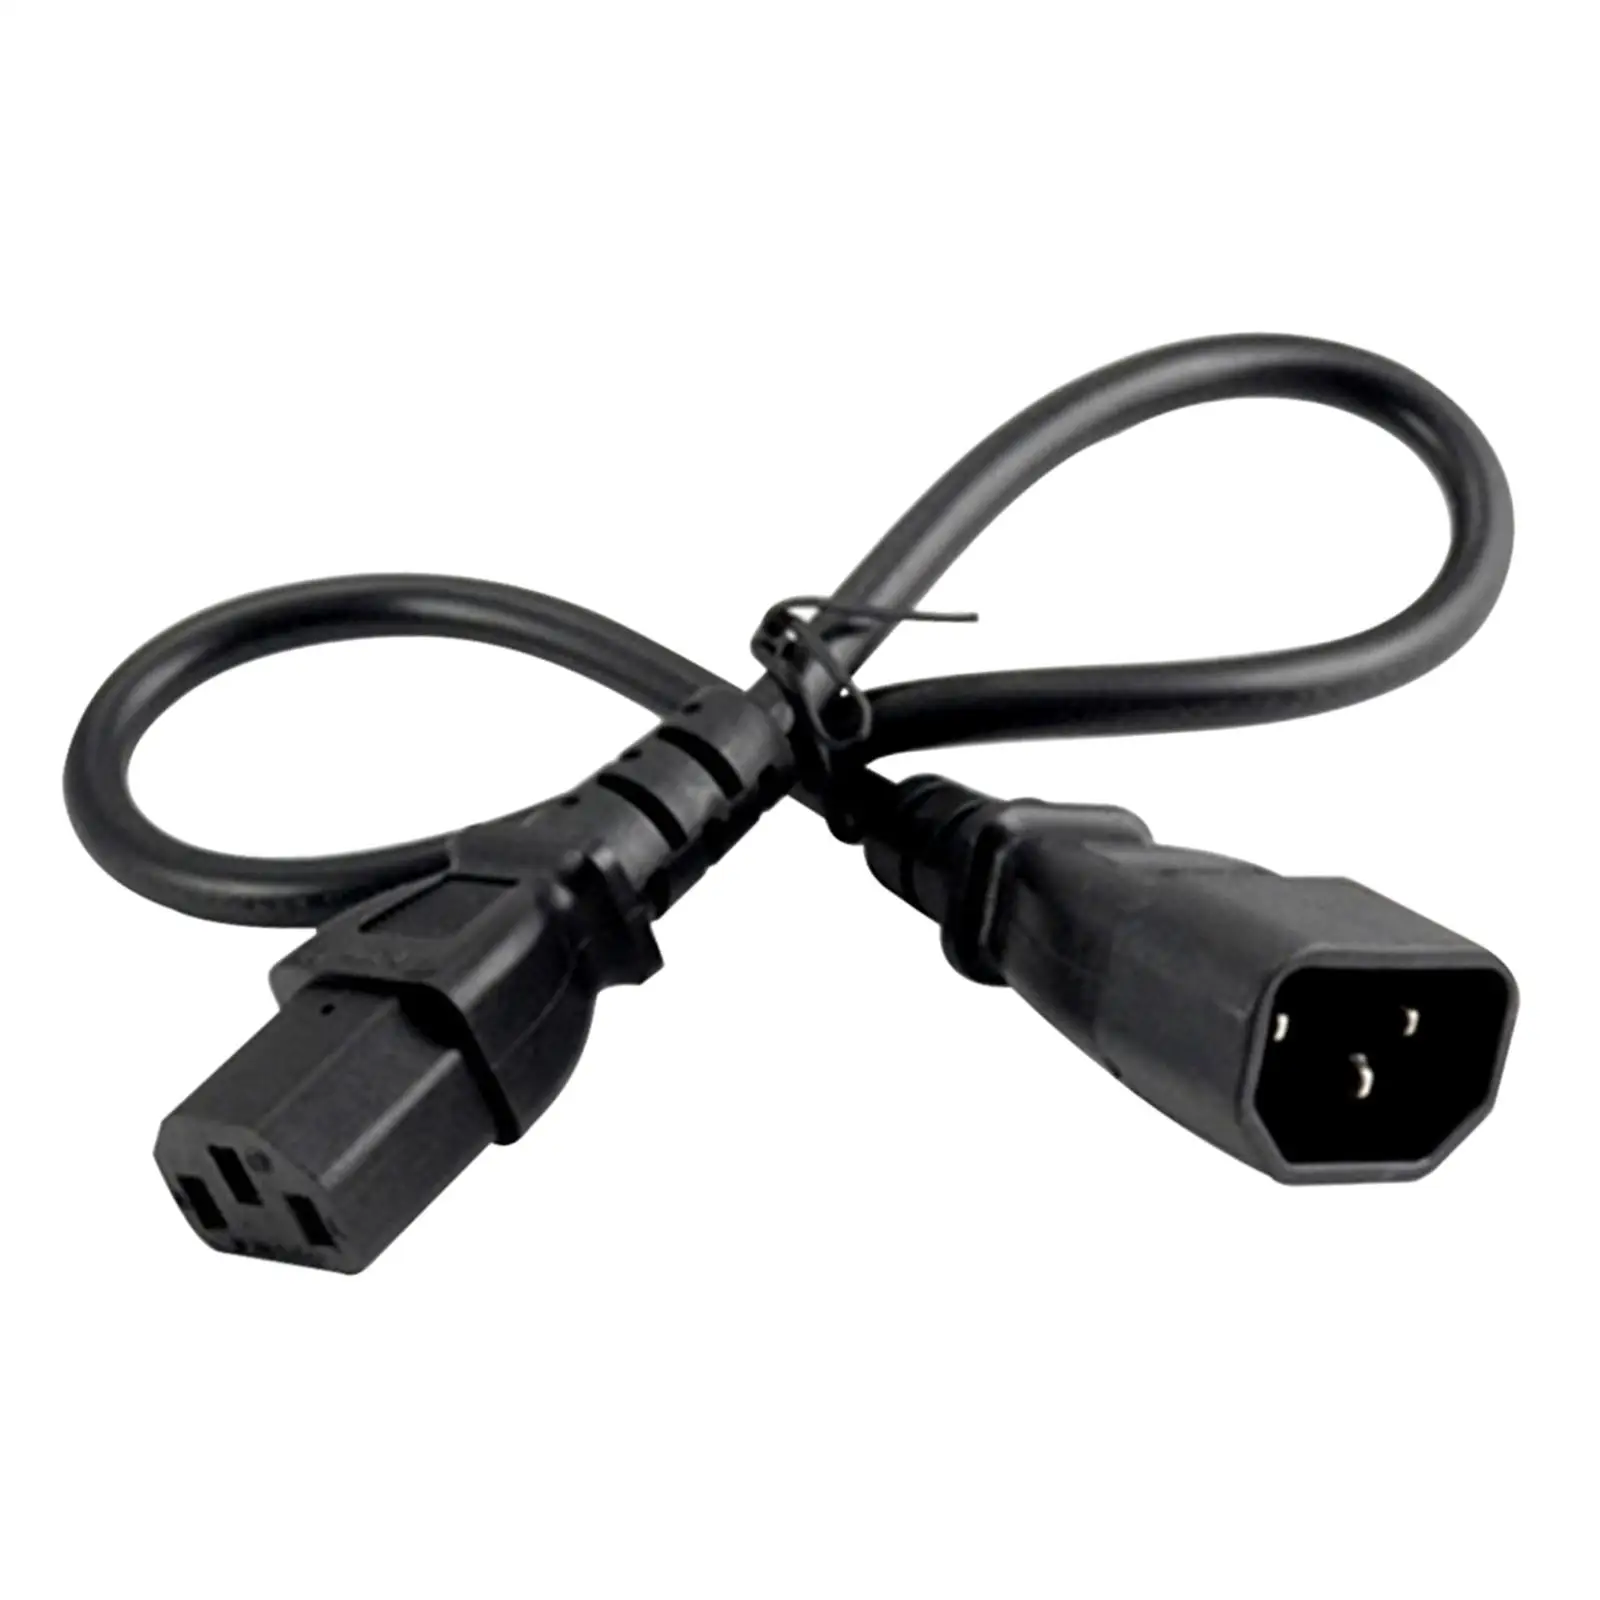 IEC320-C14 to IEC320-C13 Power Cable C14 Male to C13 Female Power Cord 10A